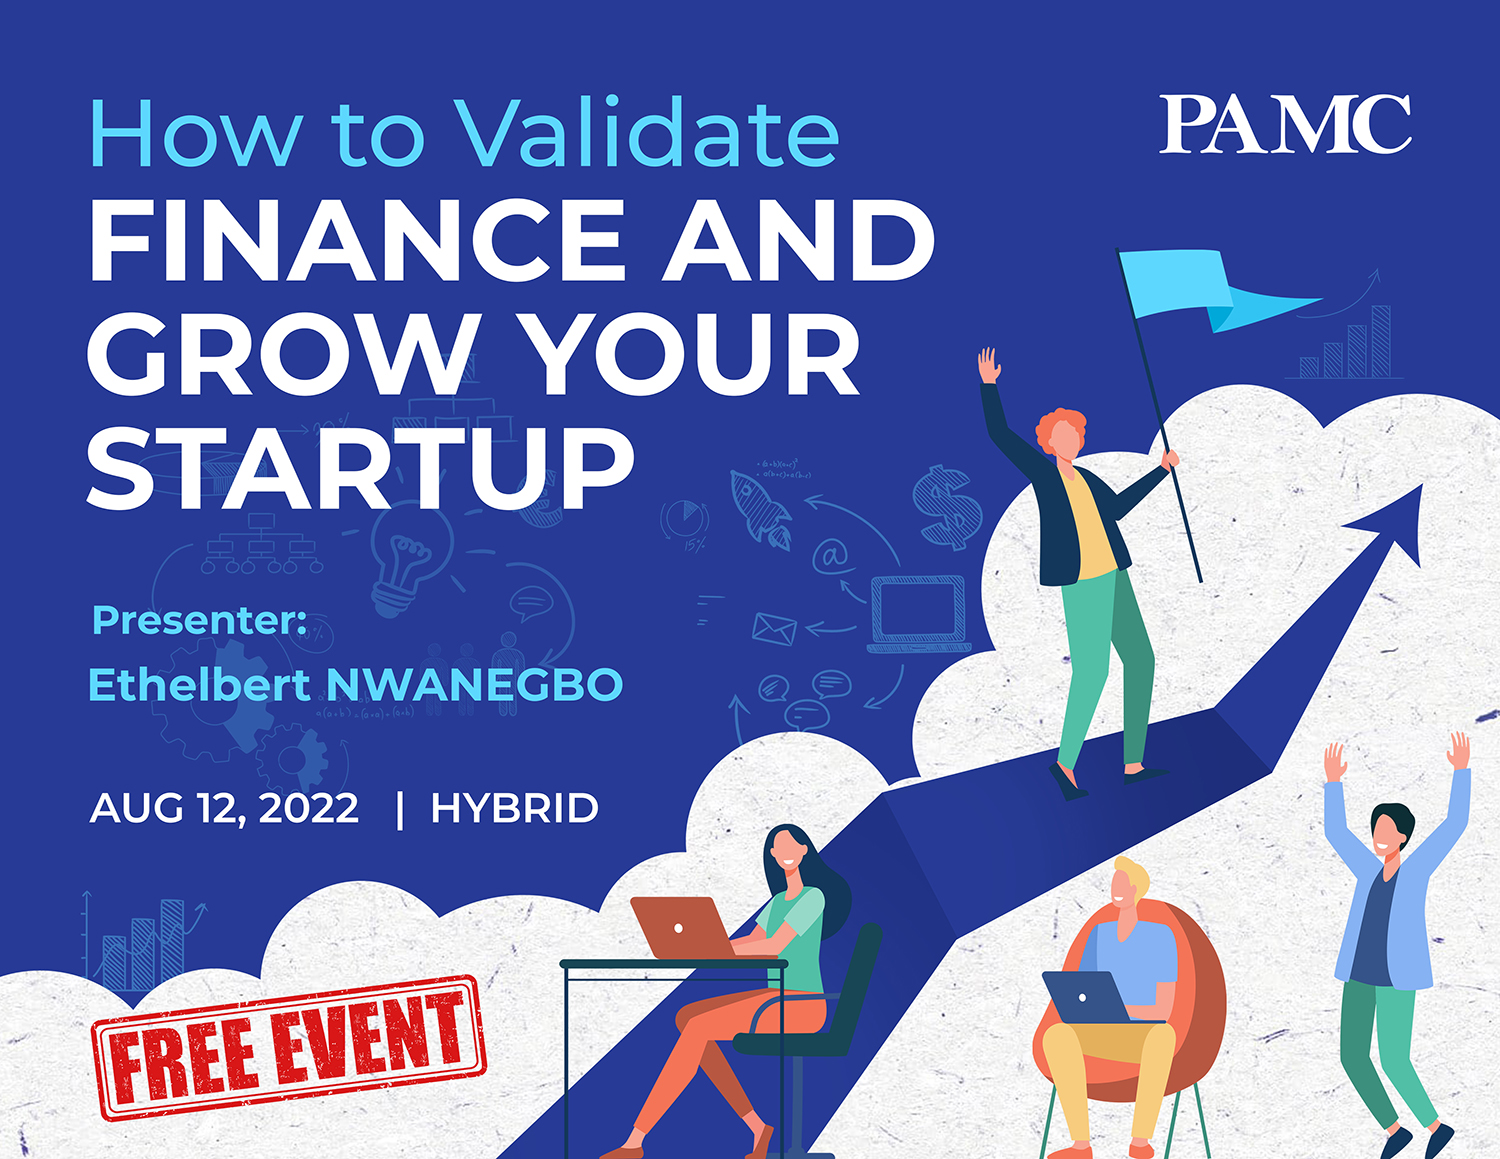 FINANCE AND GROW YOUR STARTUP